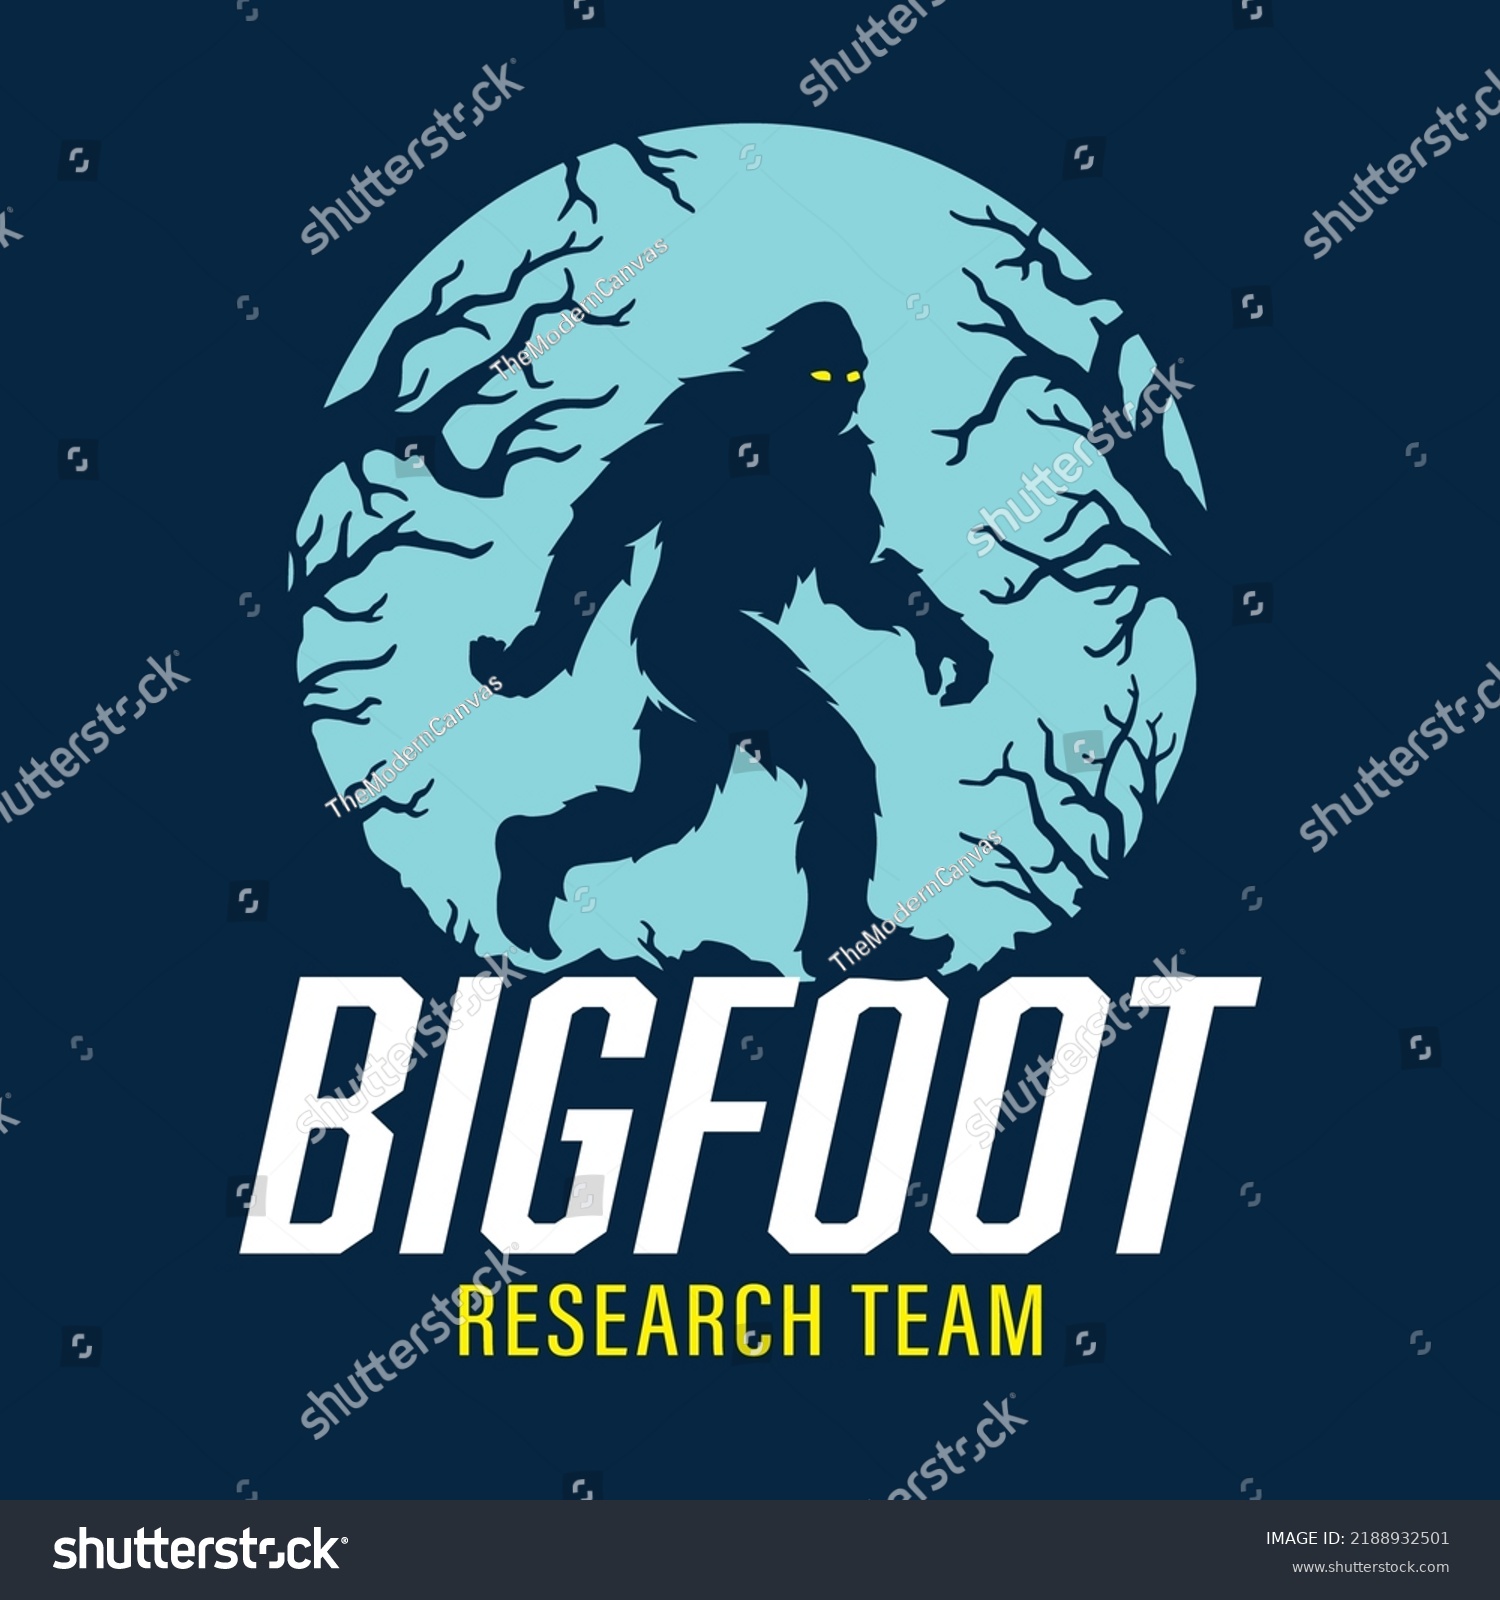 SVG of Bigfoot research team poster. Full moon sasquatch silhouette walking logo. Hairy wild man cryptid sign. Mythical forest creature in the dark woods graphic. Vector illustration. svg